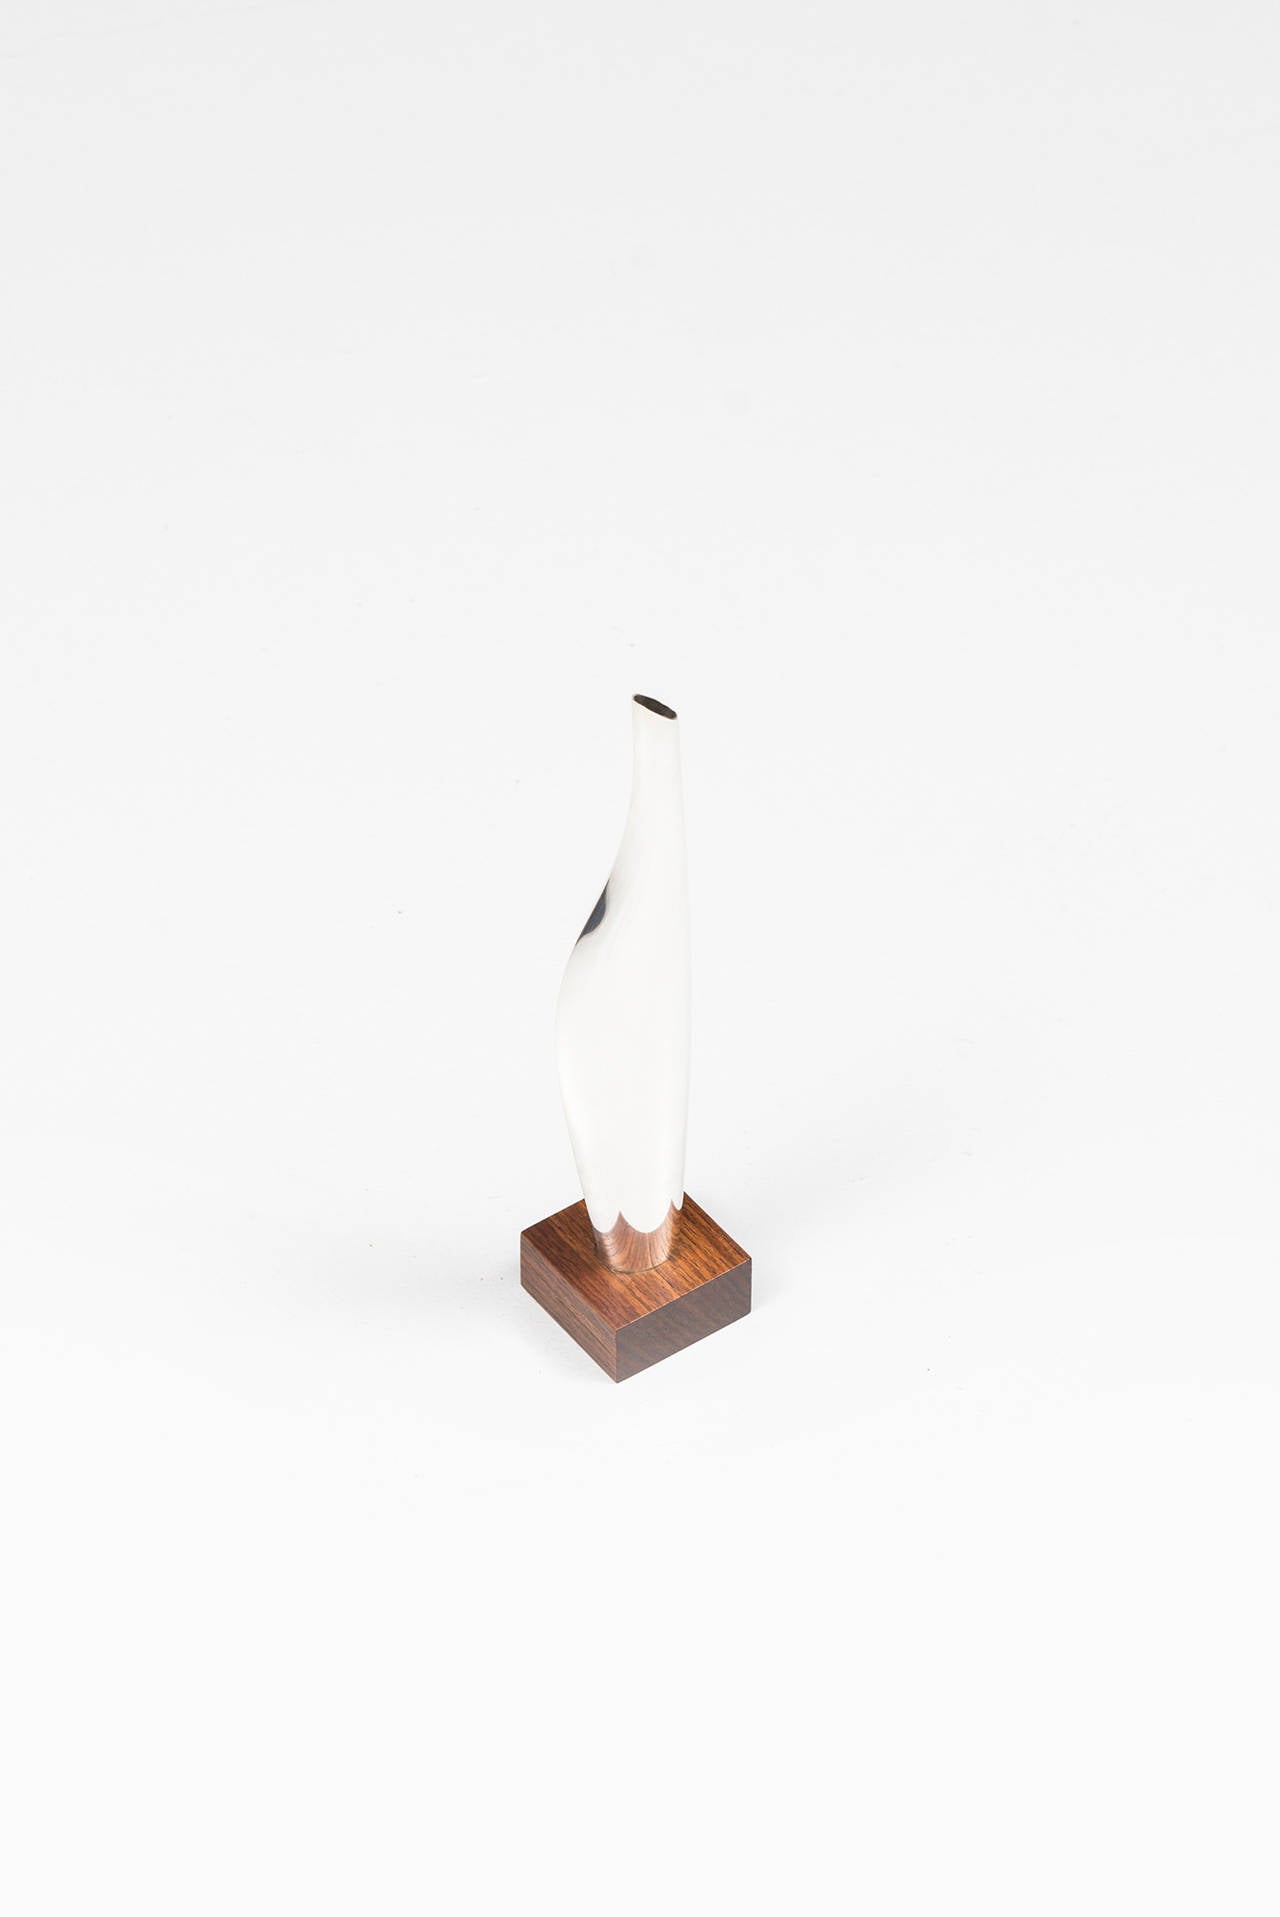 Sterling silver on rosewood base model TW17 designed by Tapio Wirkkala. Produced in Finland.